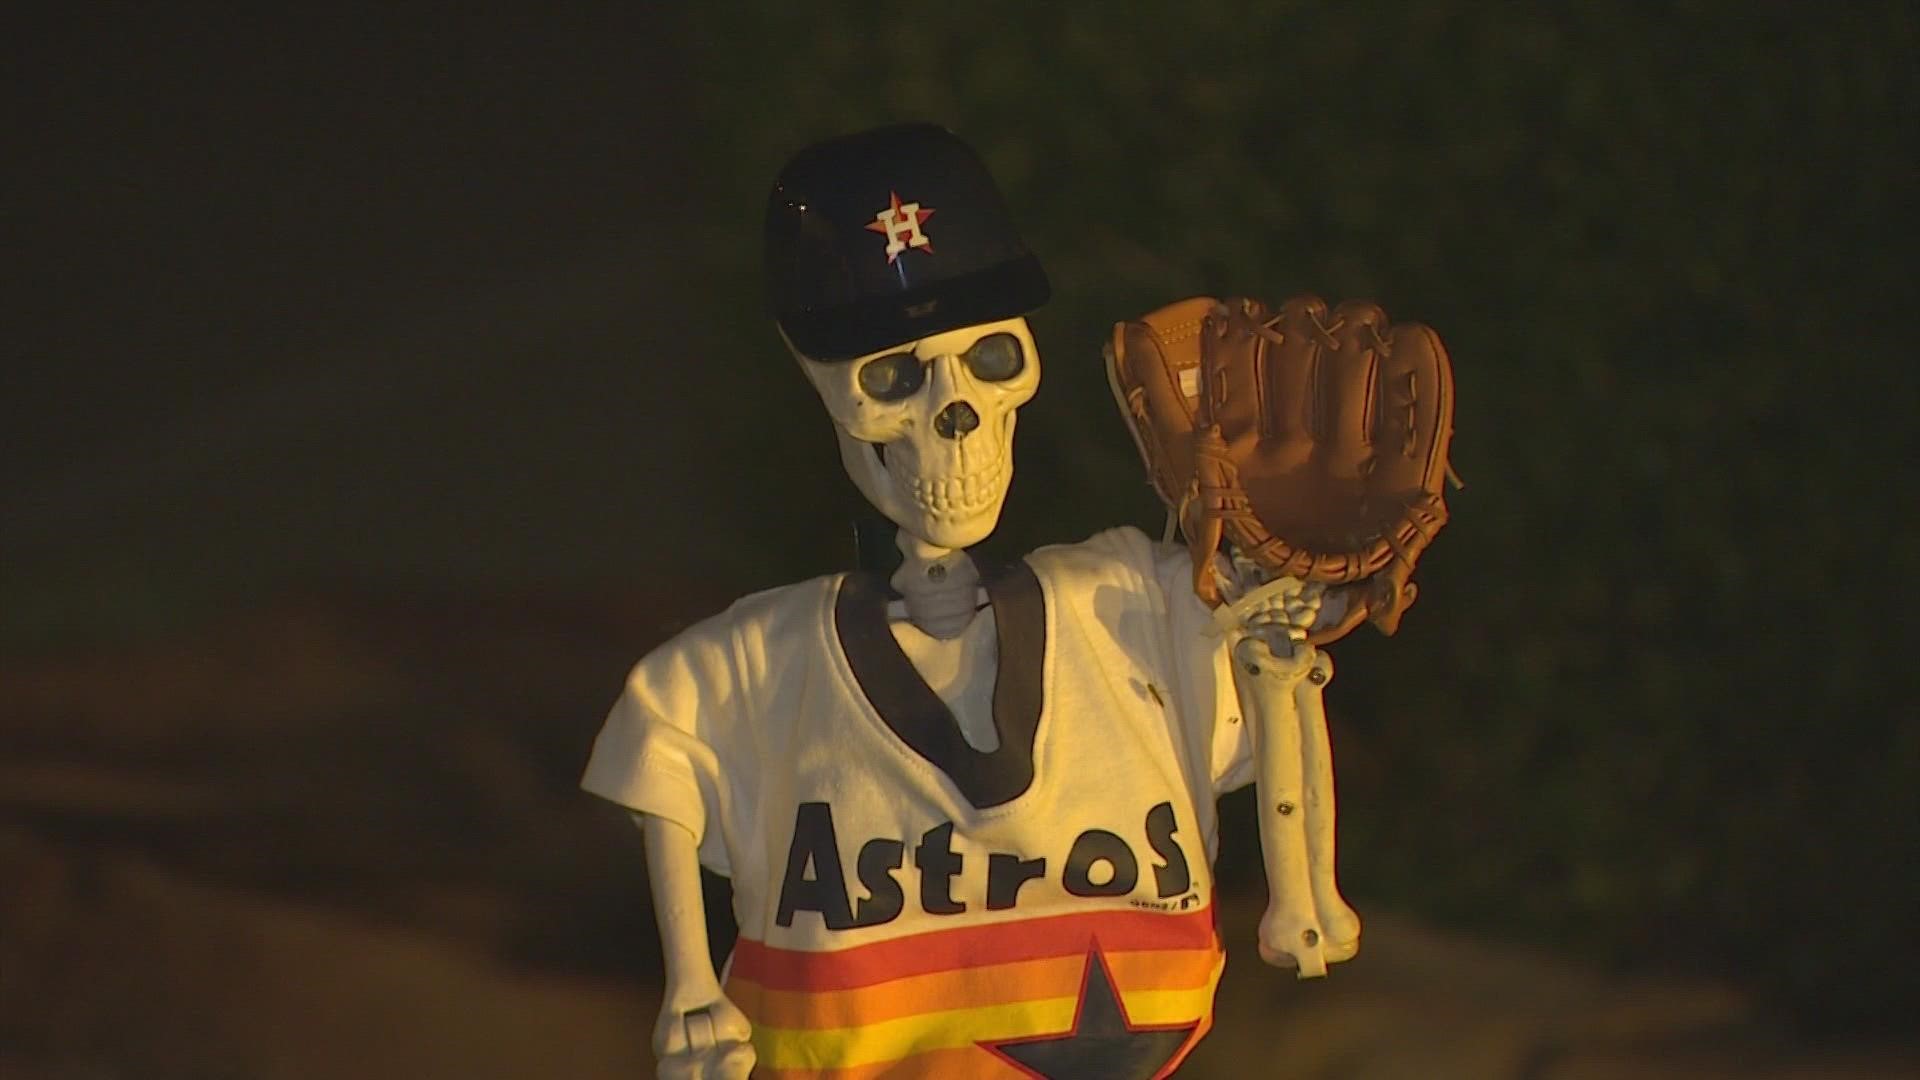 Halloween 2022 with Astros in the World Series! So what better